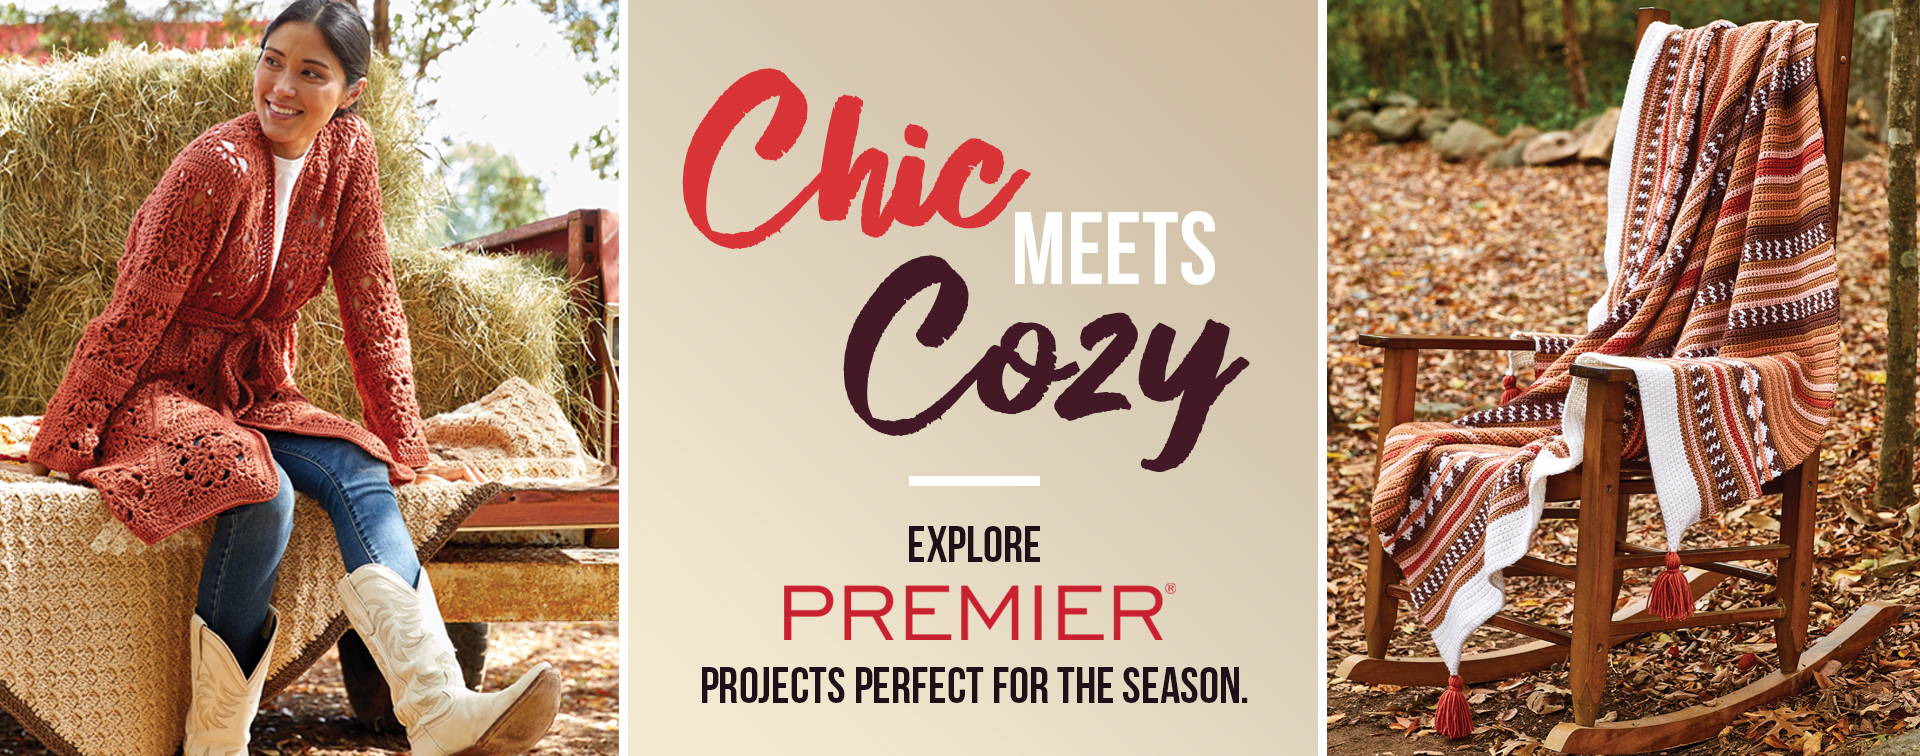 Chic meets cozy. Explore Premier projects perfect for the season.